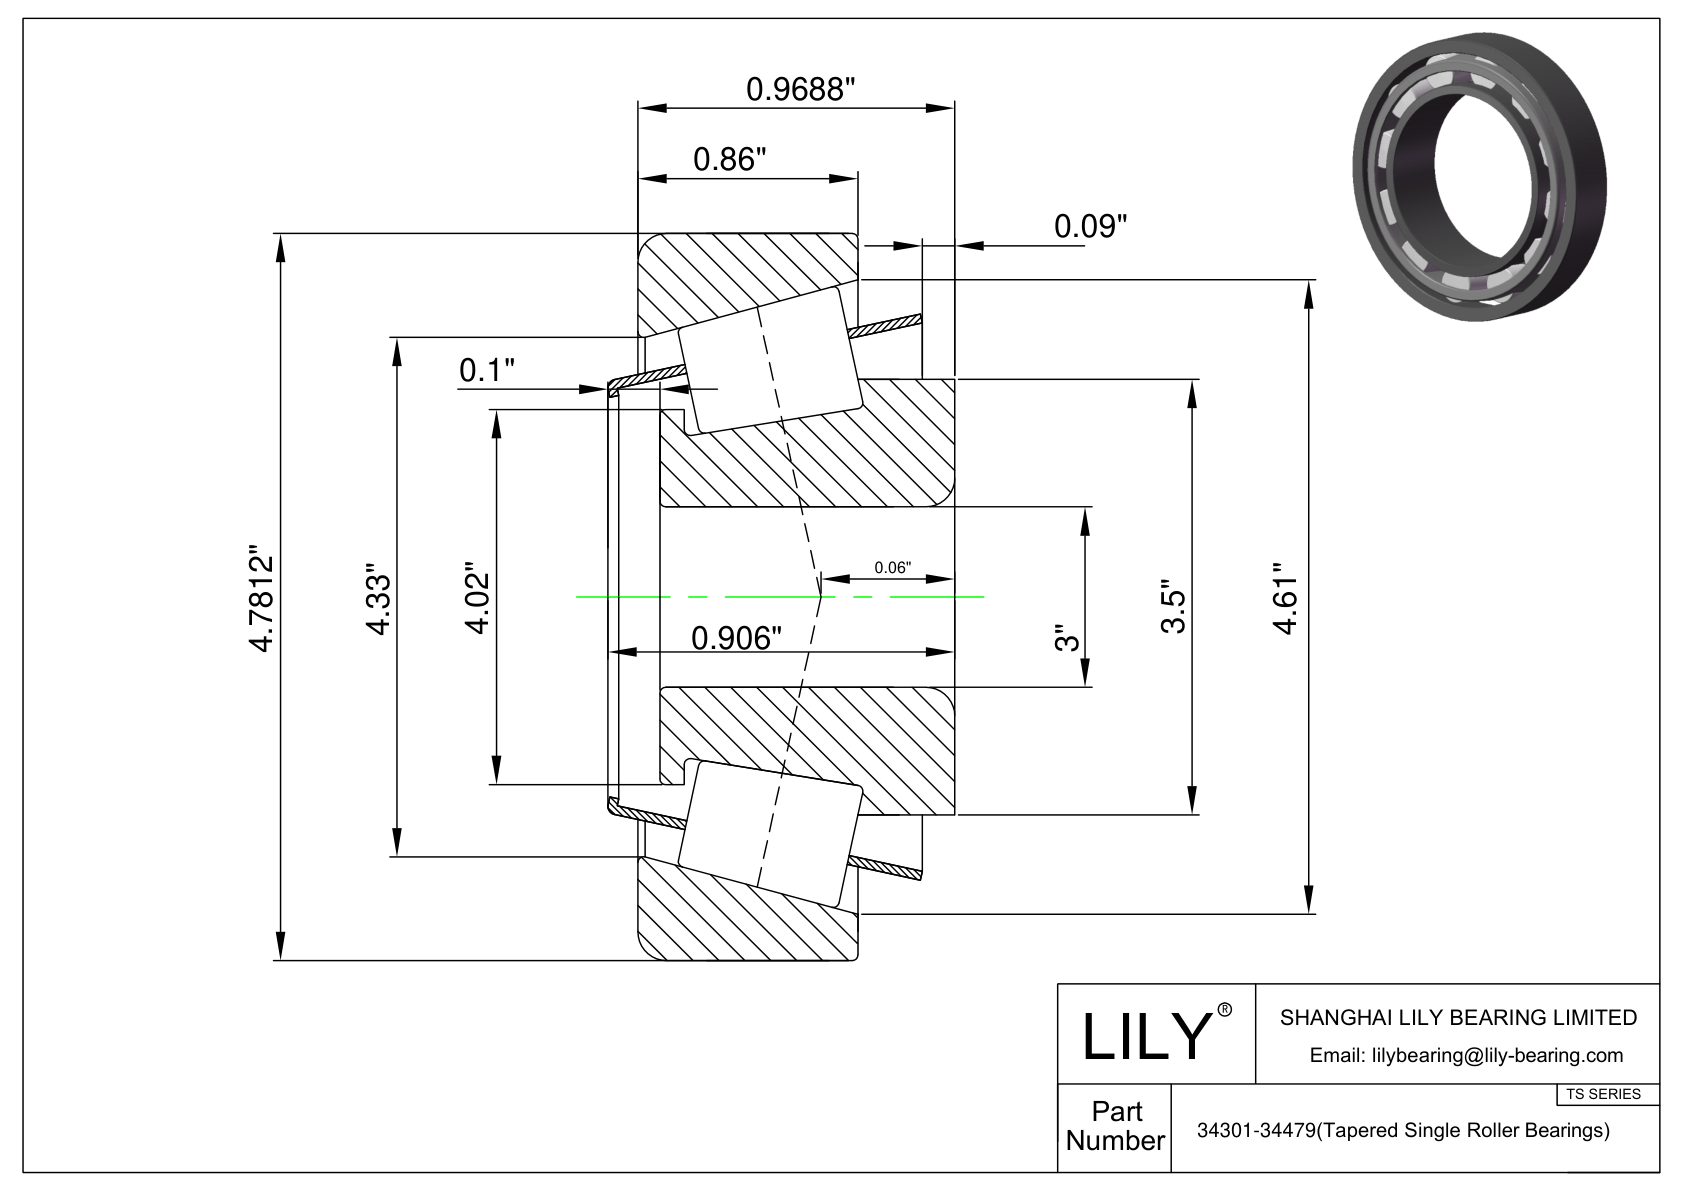 34301-34479 TS (Tapered Single Roller Bearings) (Imperial) cad drawing